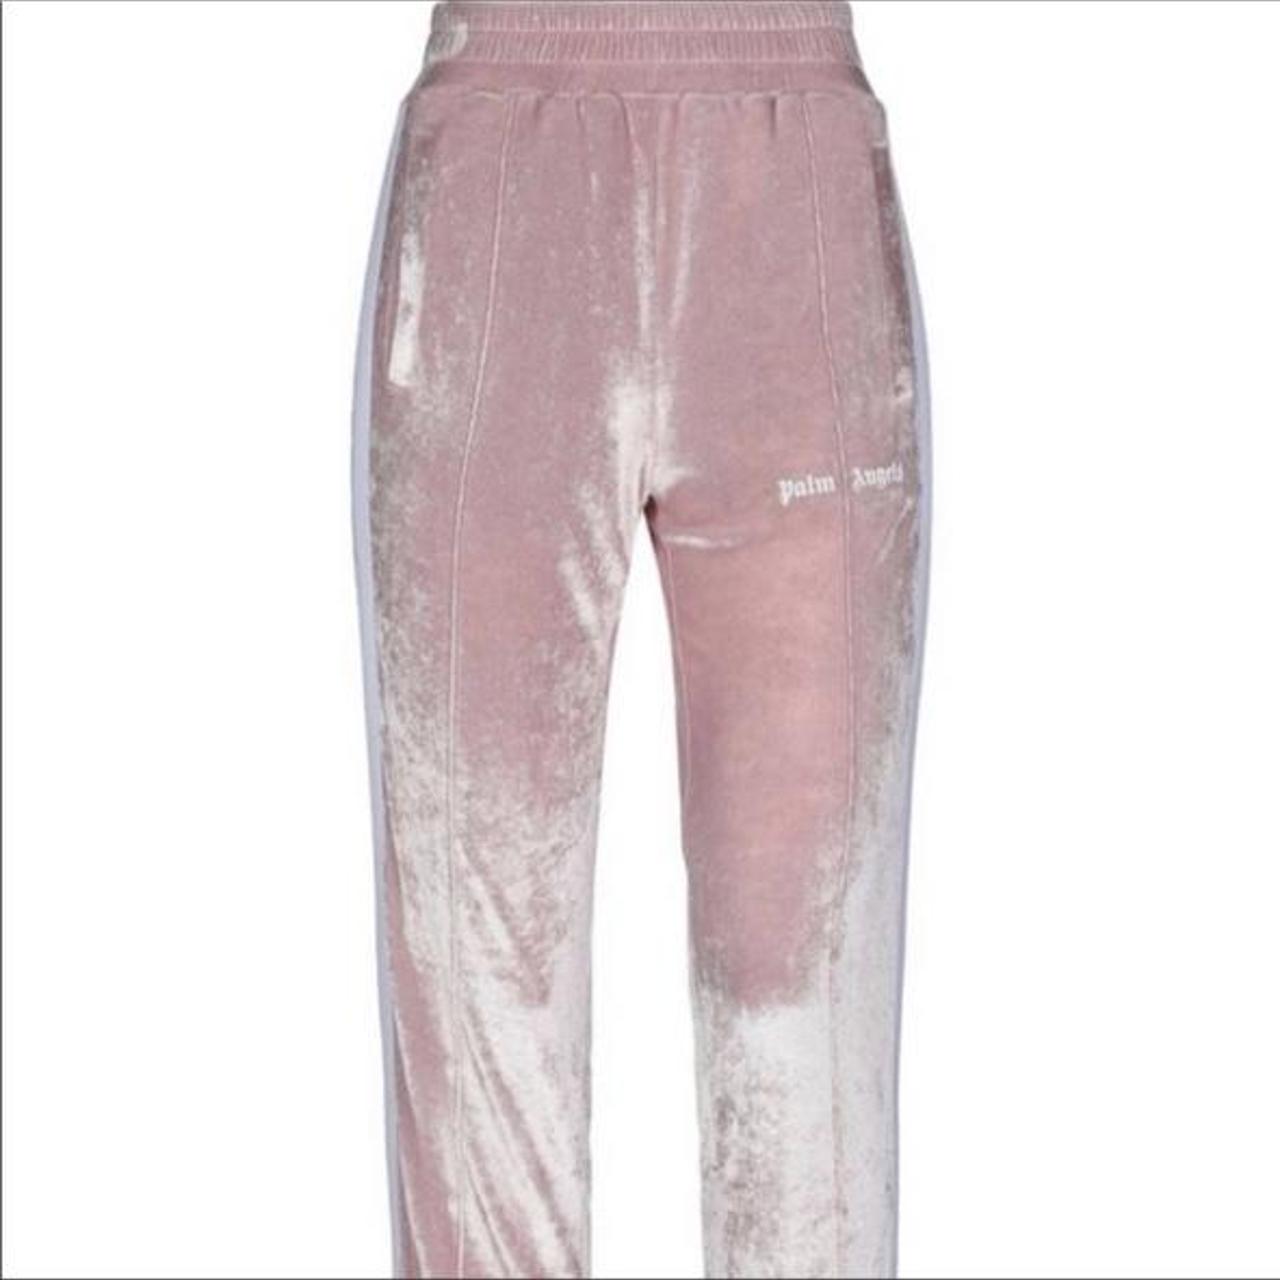 Palm Angels Women's Pink and White Trousers (2)